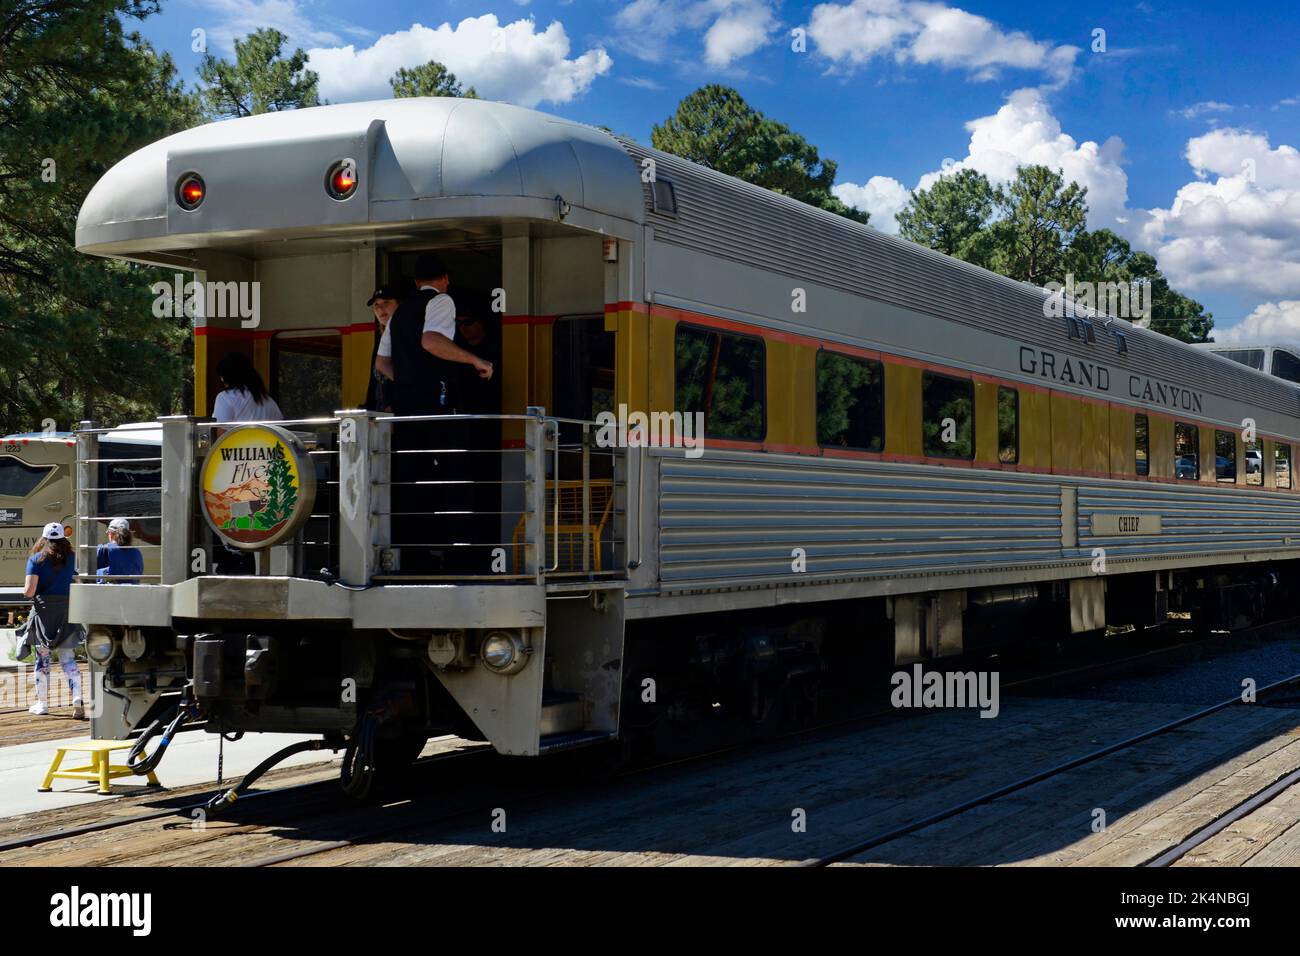 The Grand Canyon Railway silver and gold passenger cars from Williams to the Grand Canyon in Arizona Stock Photo